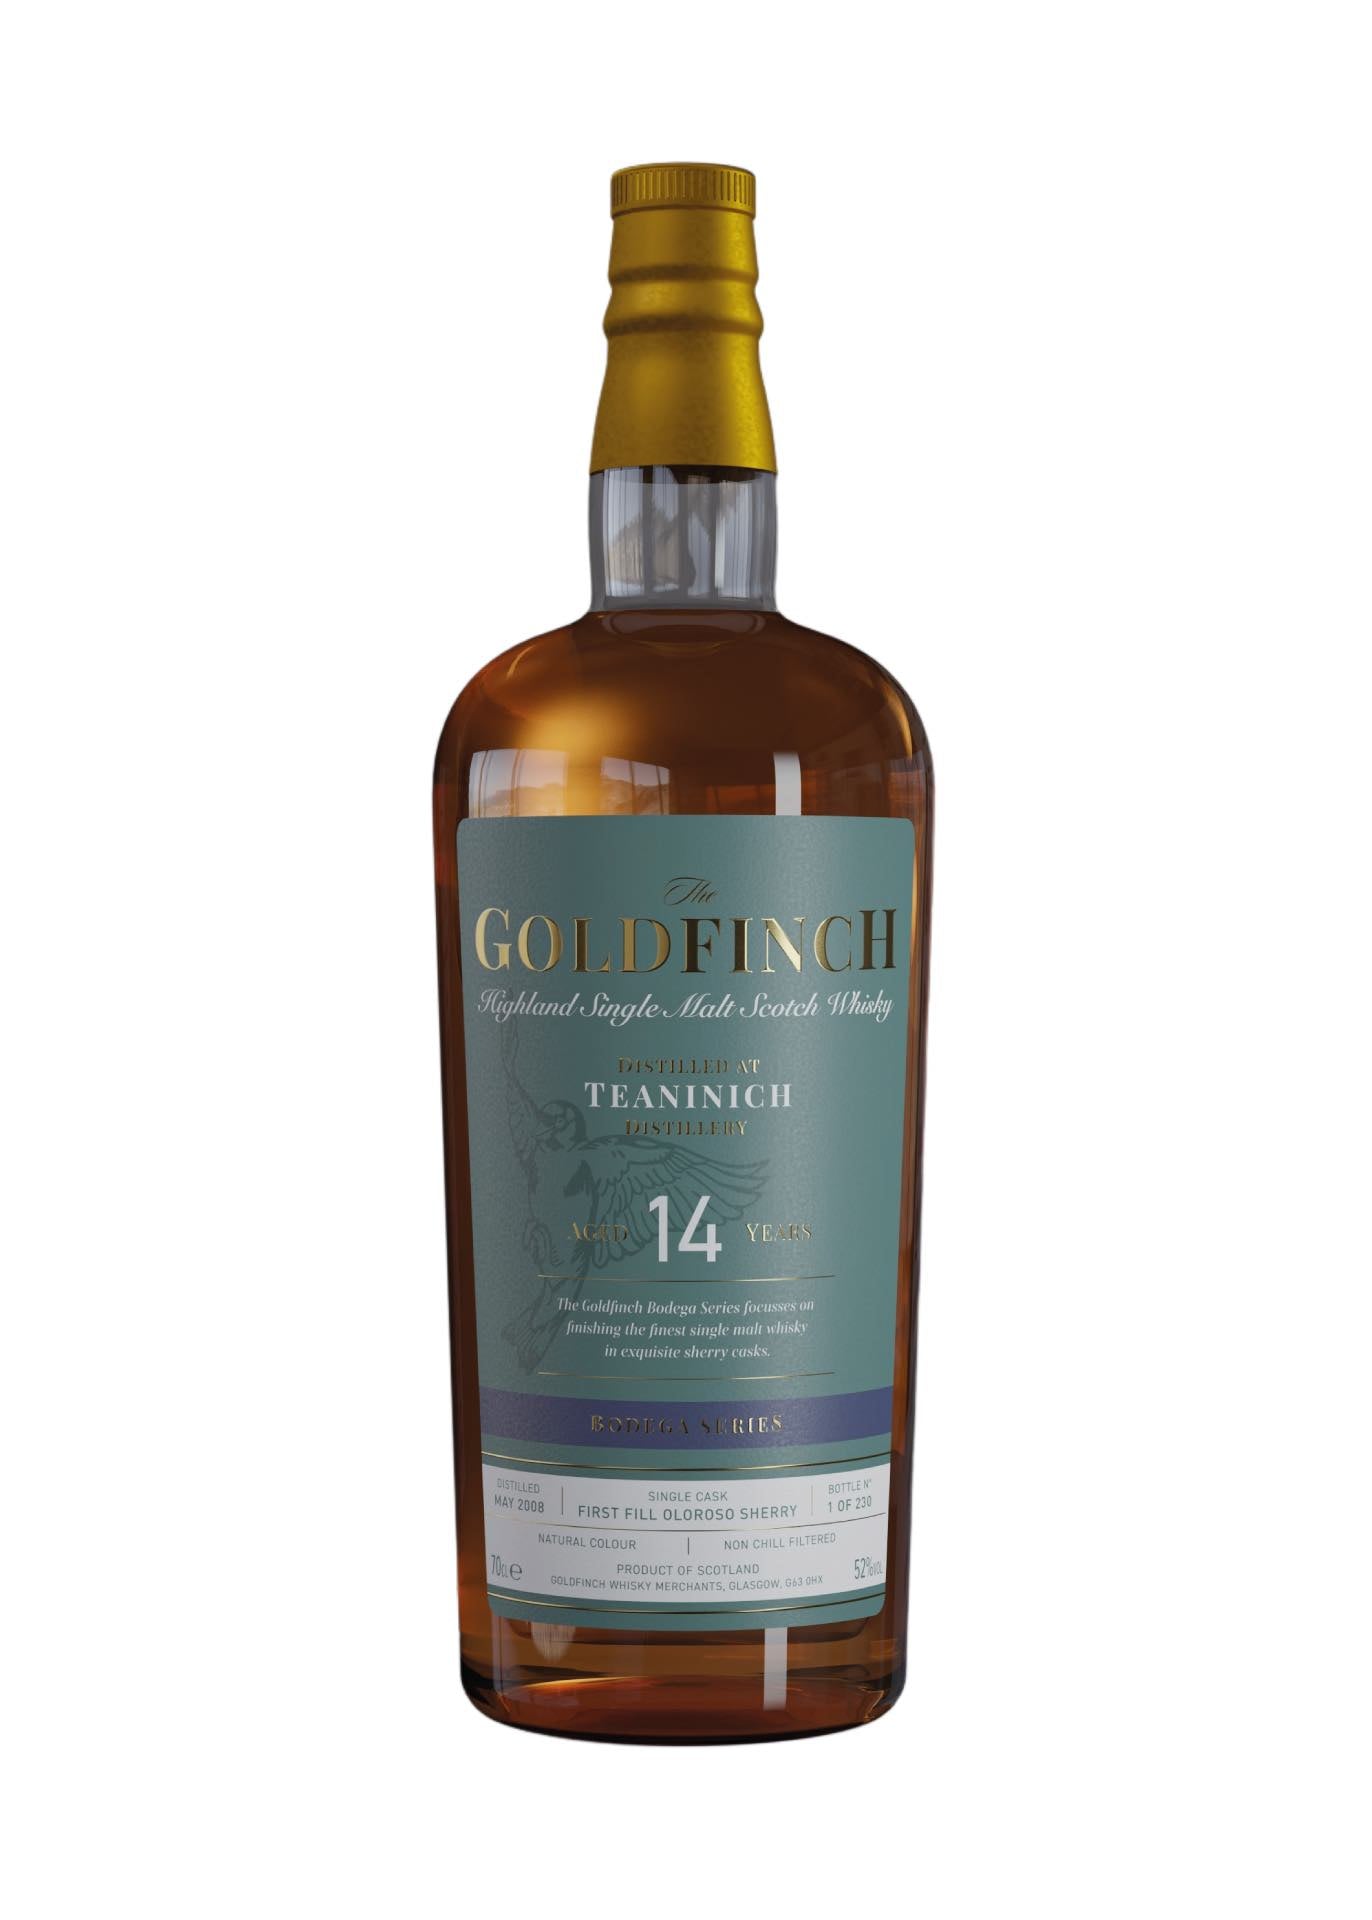 Goldfinch Teaninich 14 Year Old Single Cask Whisky